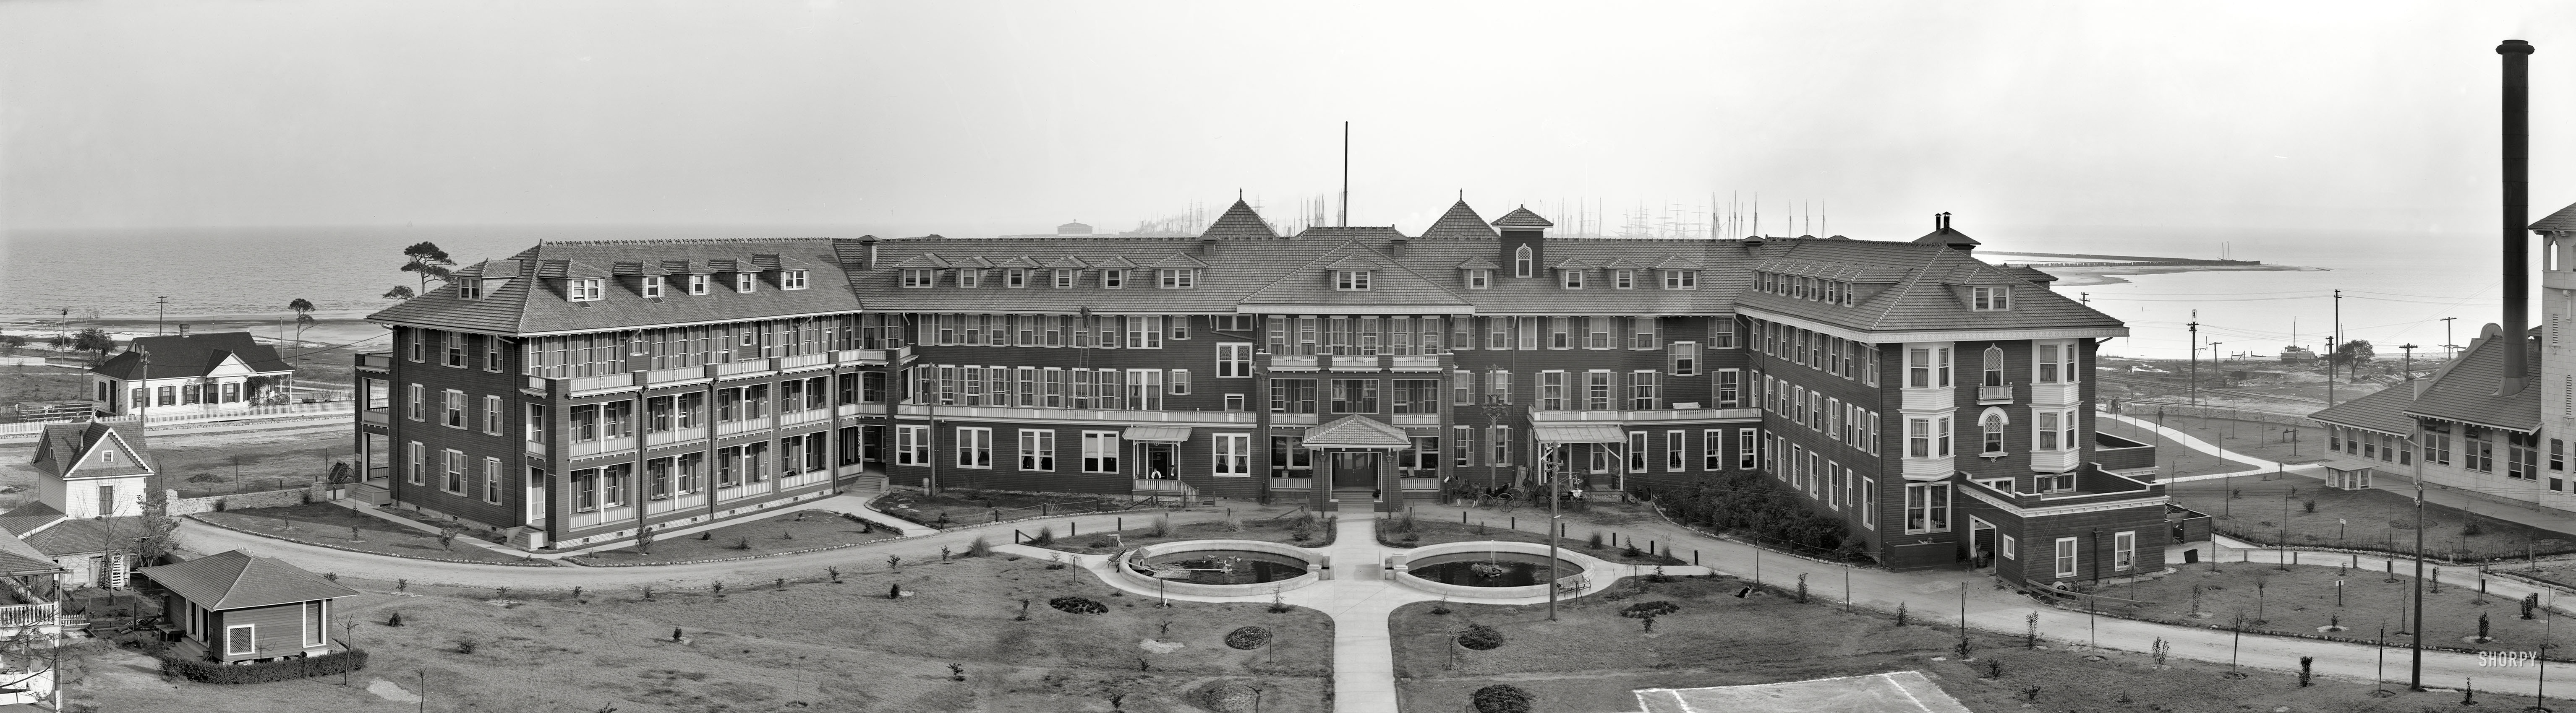 Gulfport, Mississippi, circa 1906. "Great Southern Hotel." Built 1902-03; demolished in 1951. Panorama of three 8x10 glass negatives. View full size.